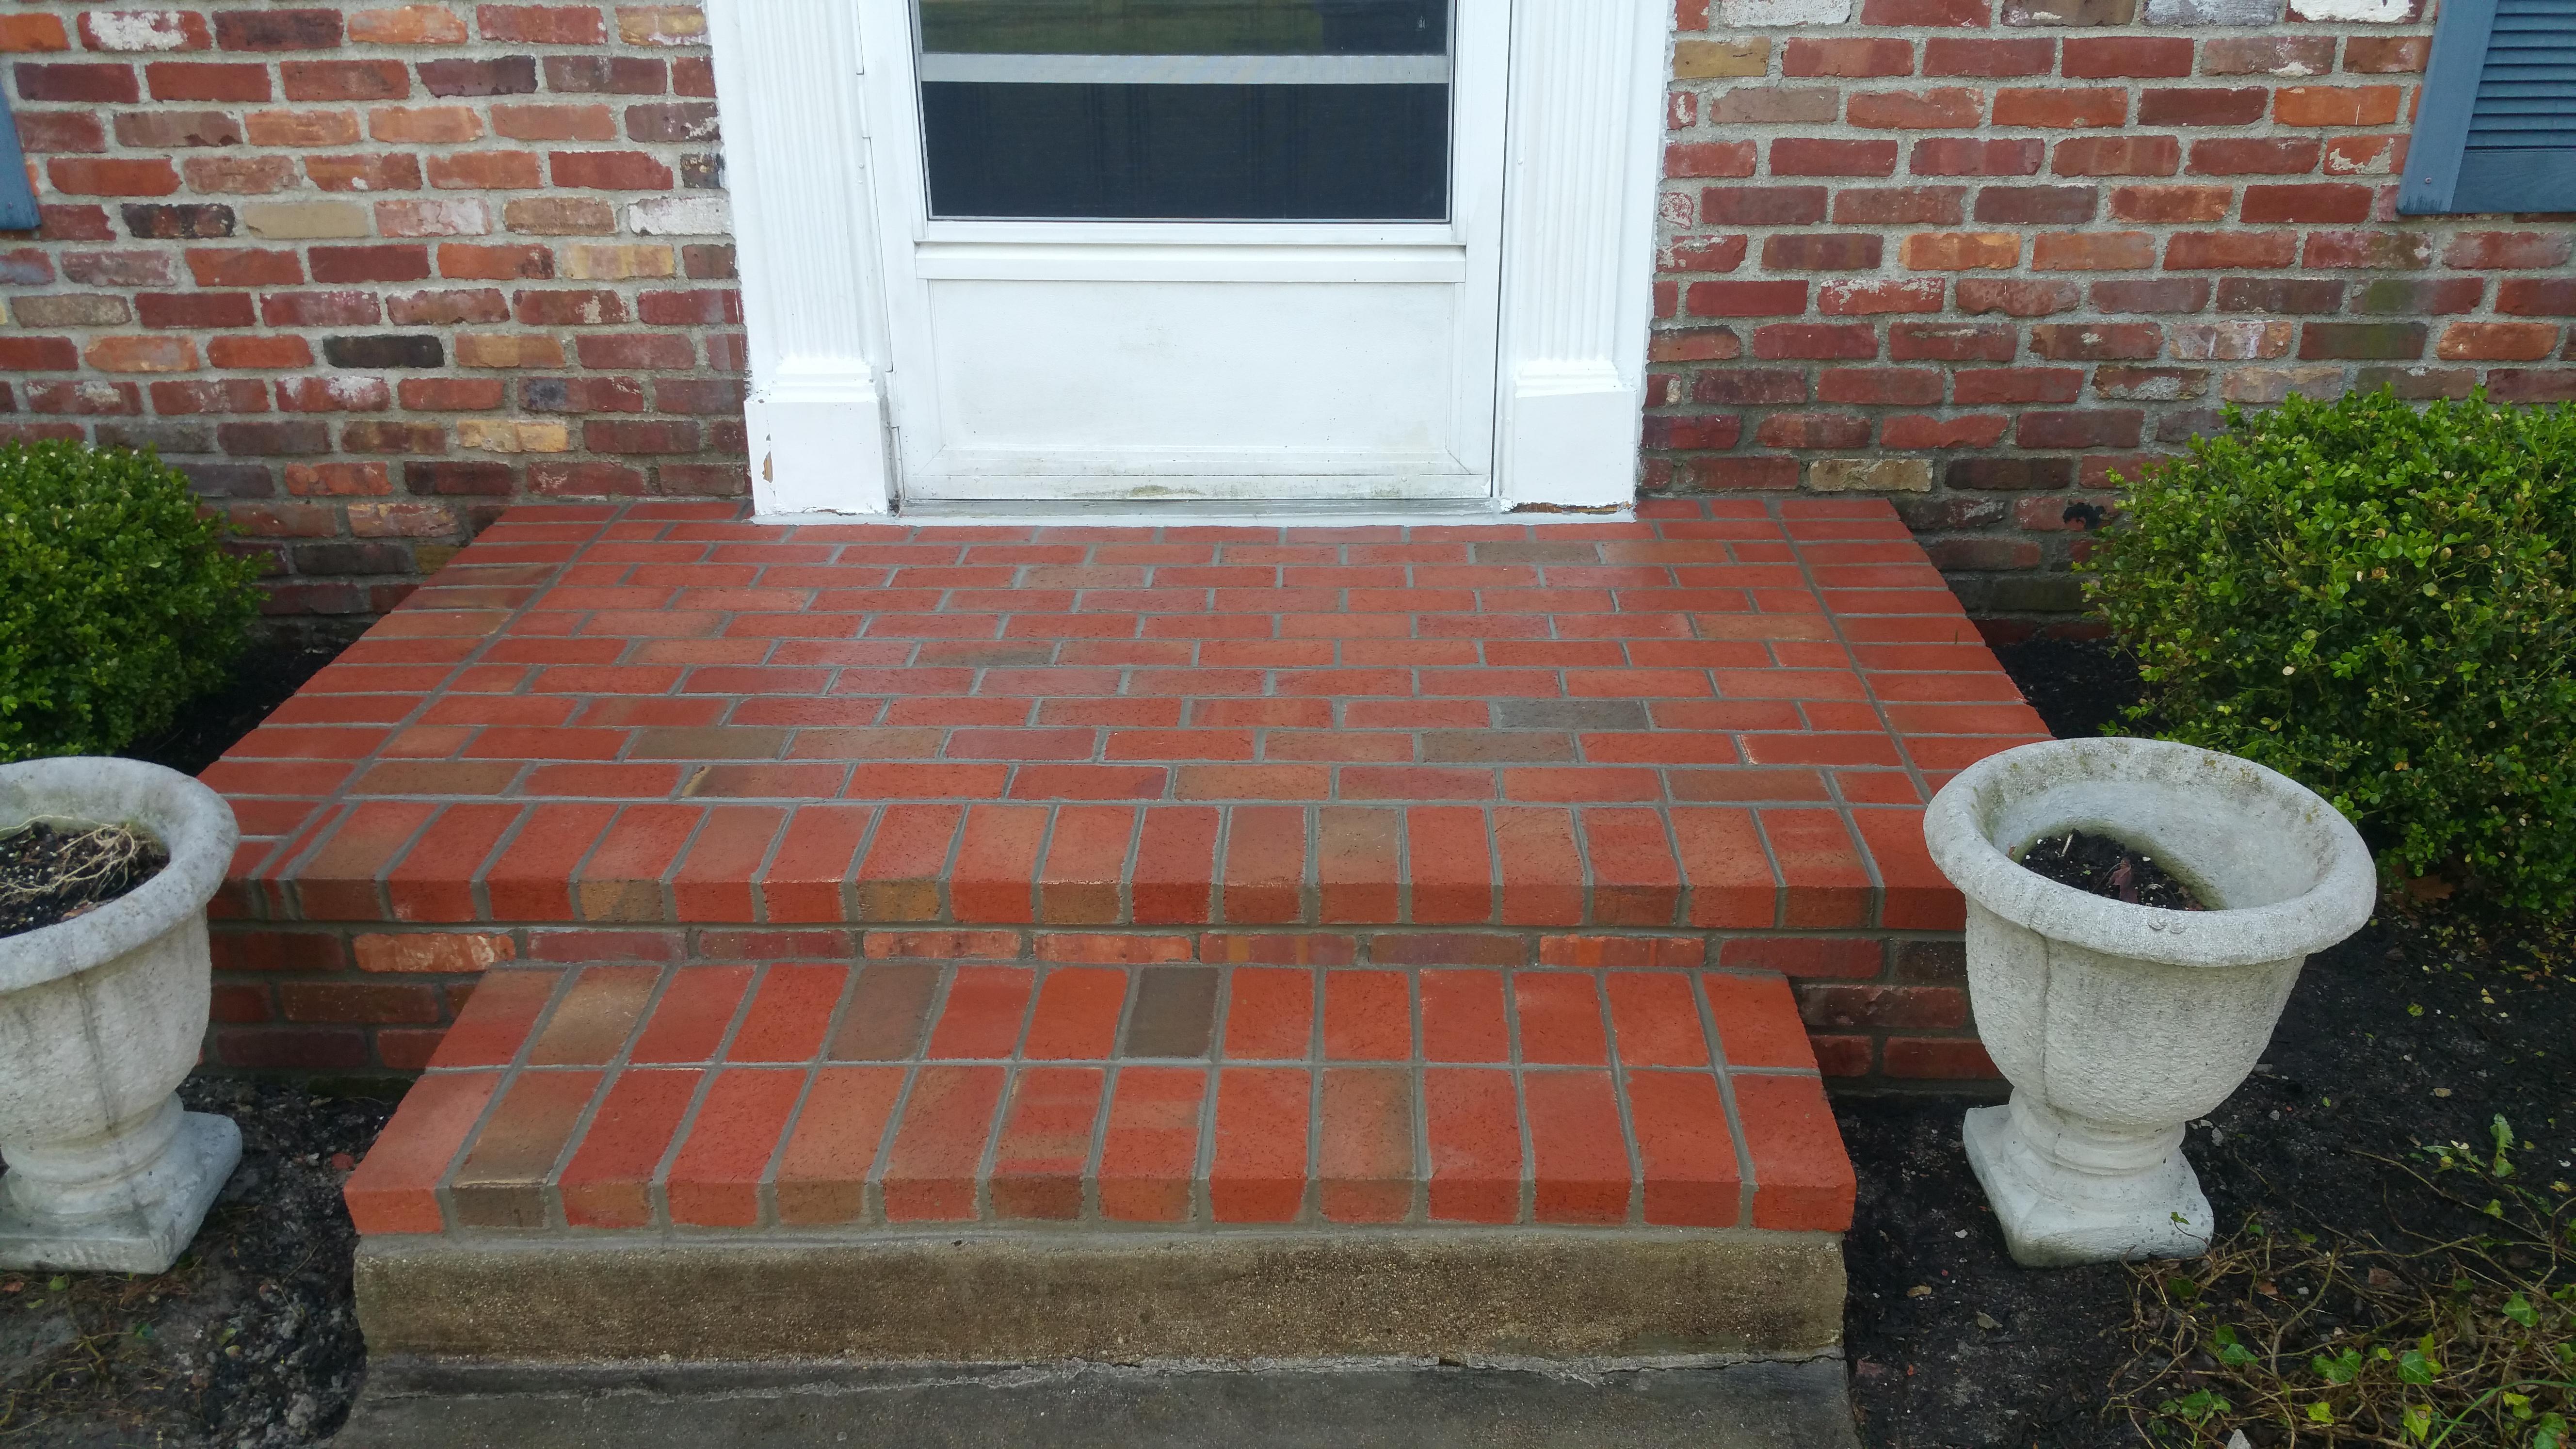 We removed the top and sides of this porch just leaving the fill in place, and laid new brick all the way around and on top. We washed all the new masonry and sealed it with a 10 year breathable masonry sealer.